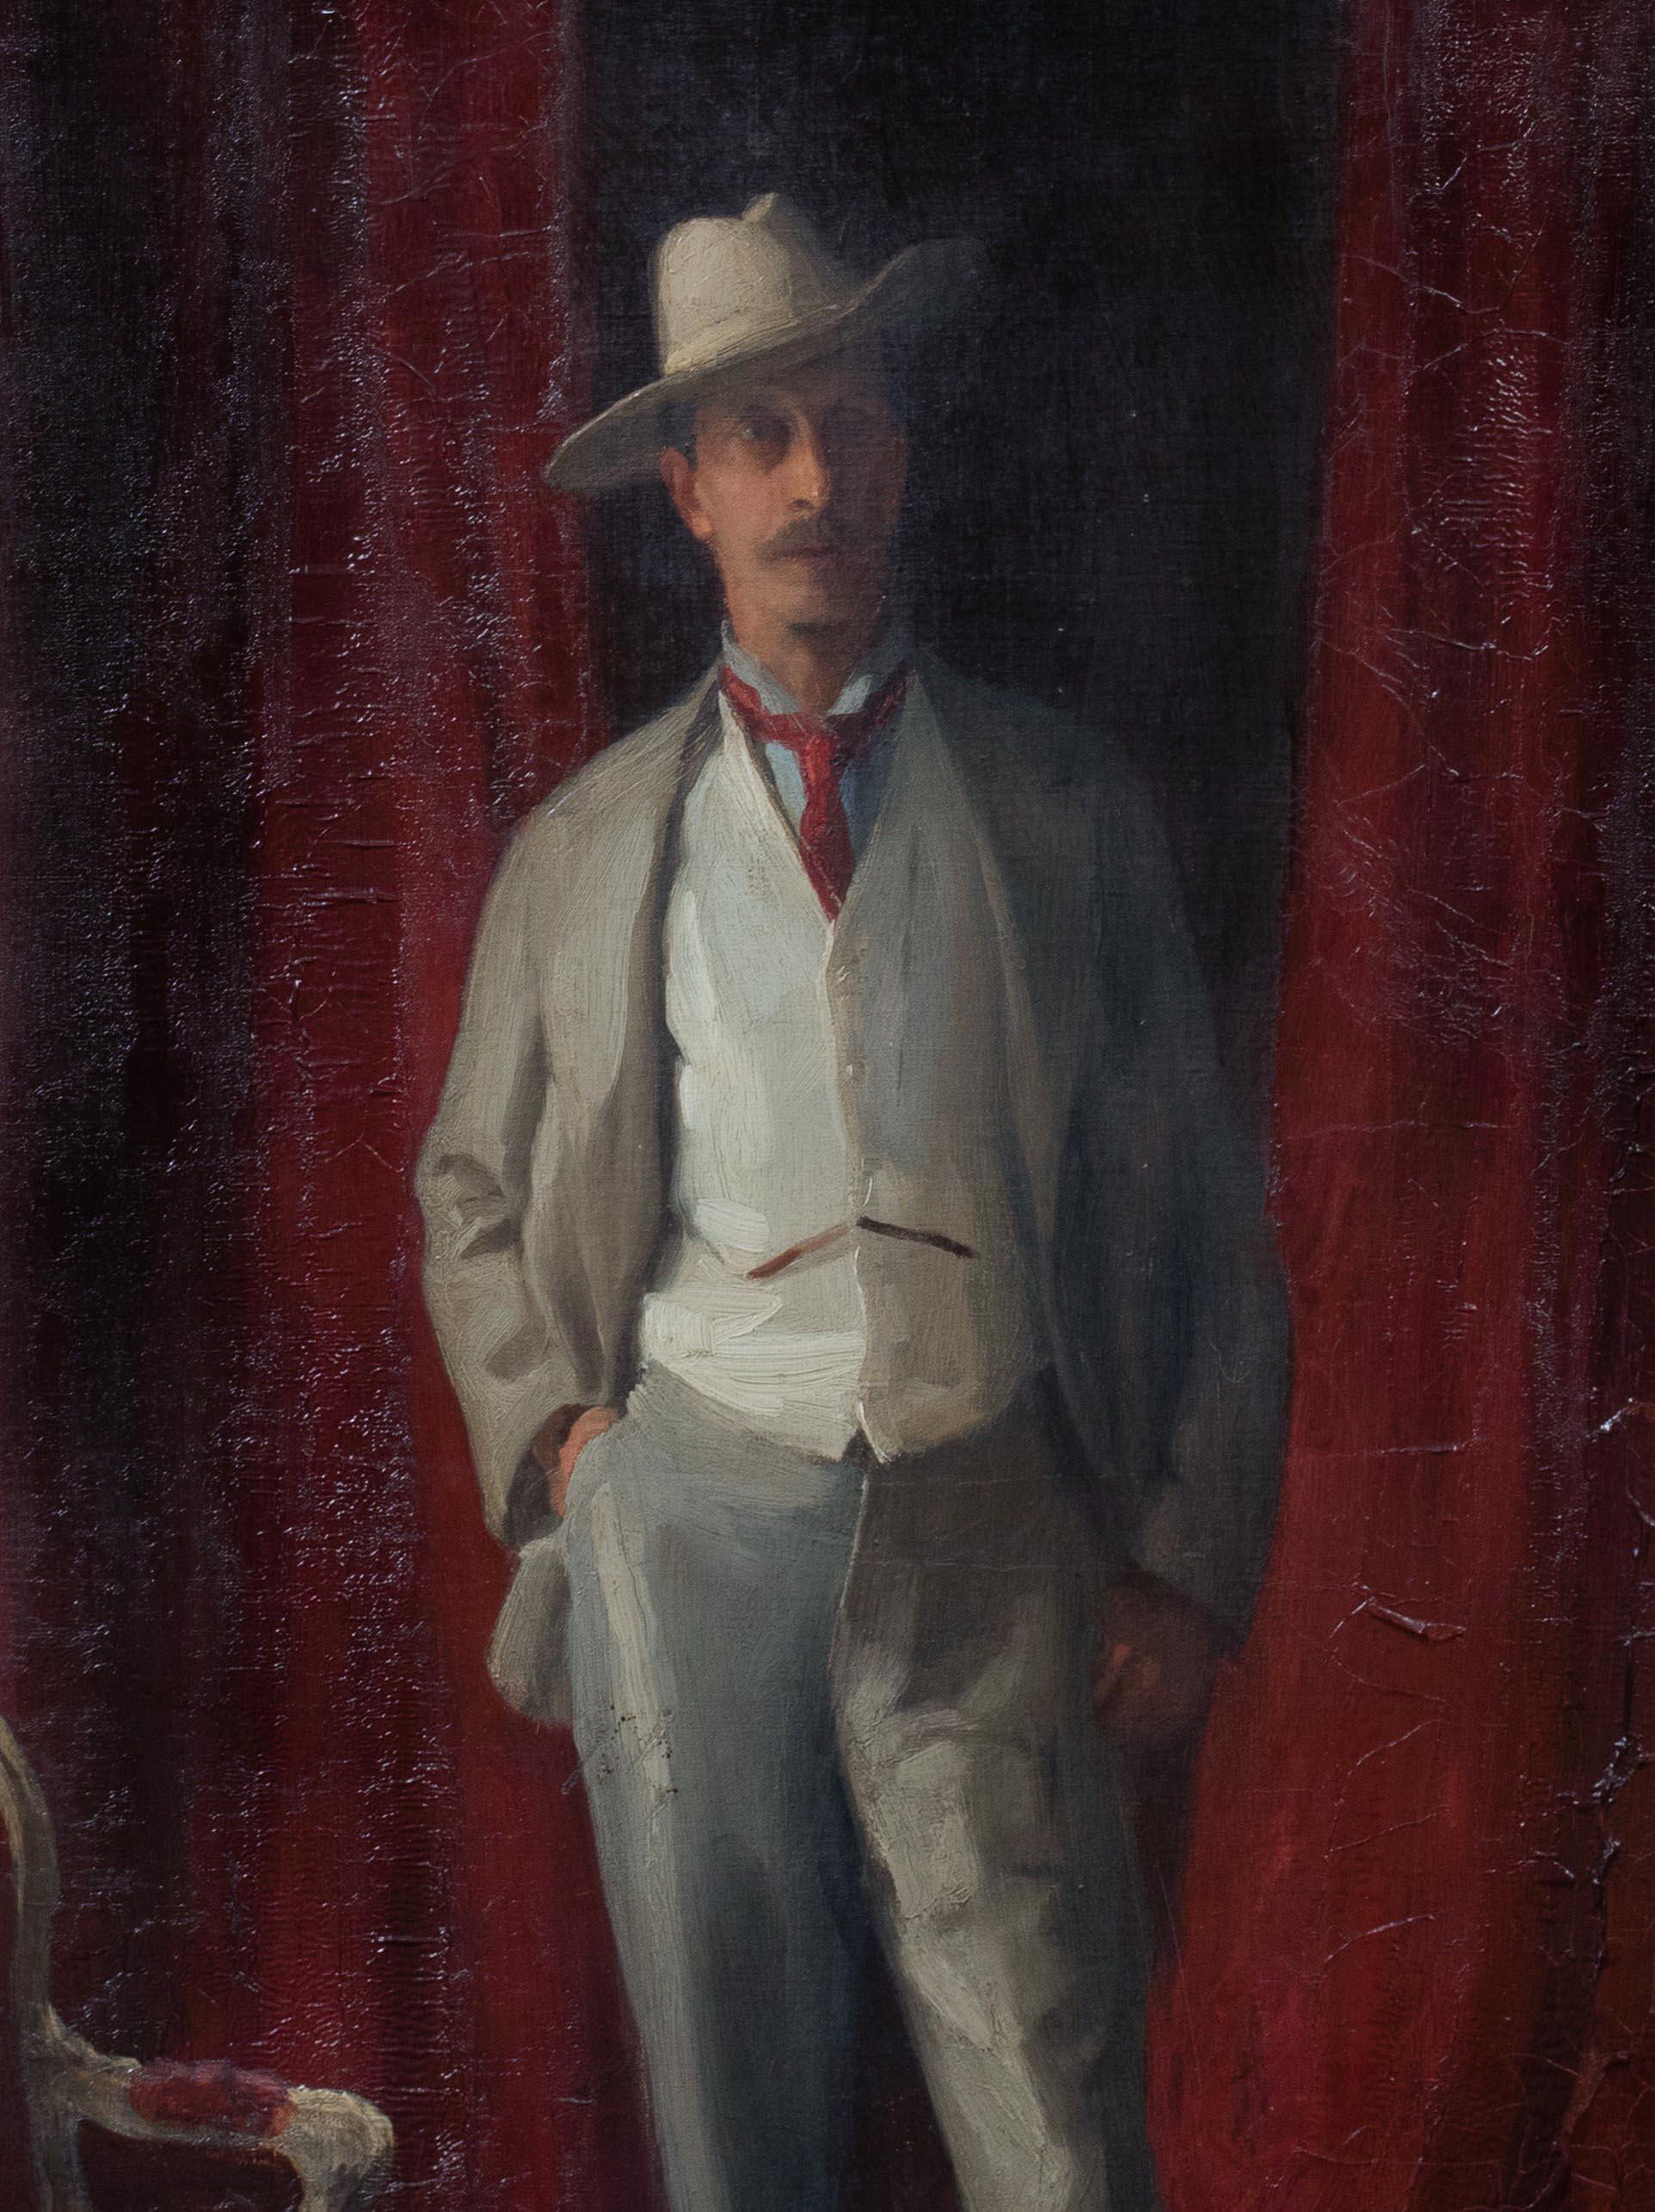 Portrait Of William Burdon-Muller, Santiago, Chile, dated 1899

by HENRY HARRIS BROWN (BRITISH, 1864-1948)

Large 1899 portrait of William Burdon-Muller, oil on canvas by Henry Harris Brown. Full length portrait of Muller, a successful merchant from